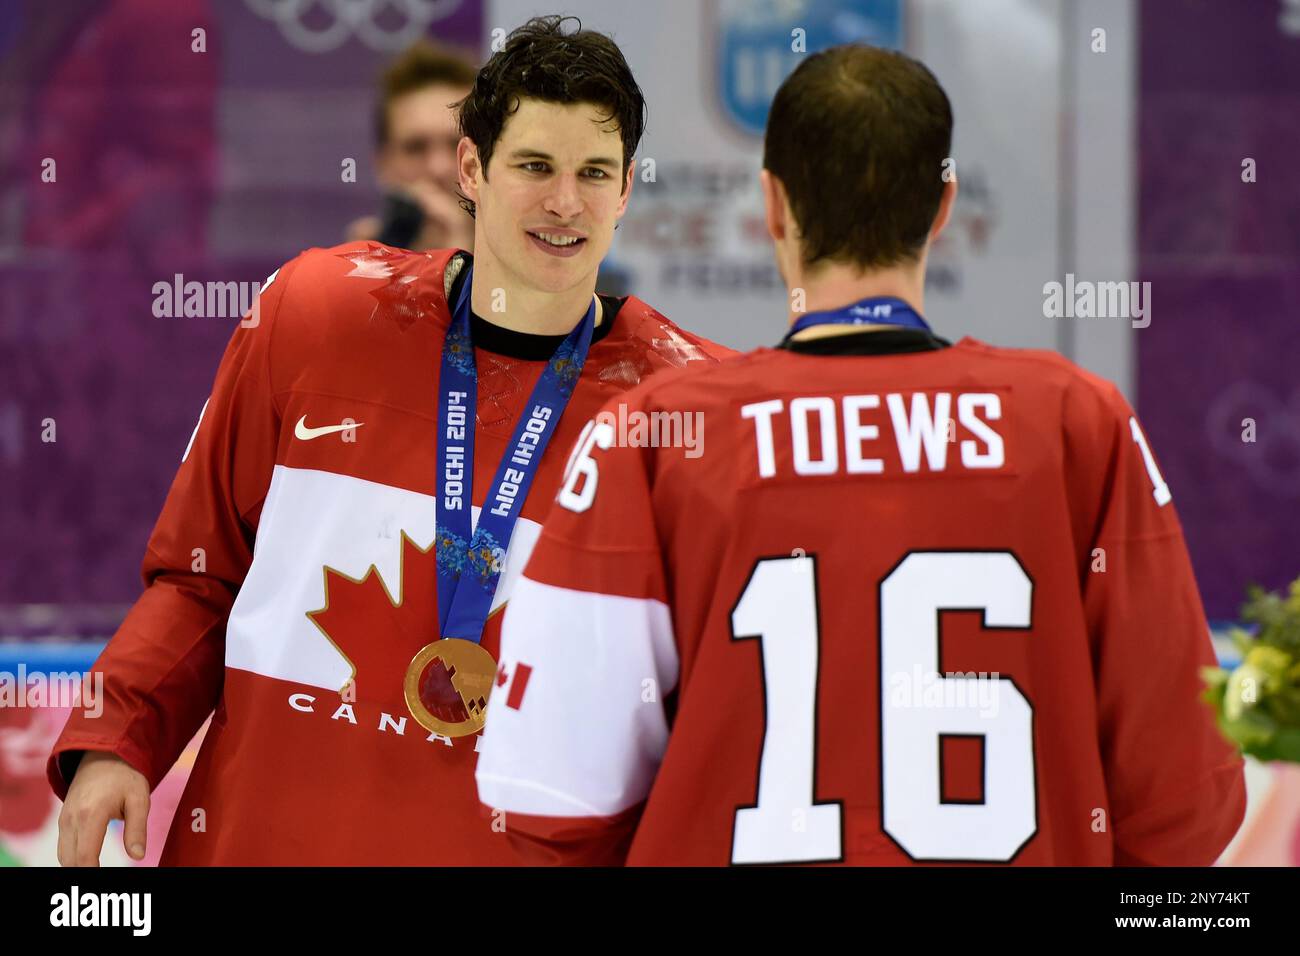 How many Olympic gold medals does Sidney Crosby have?